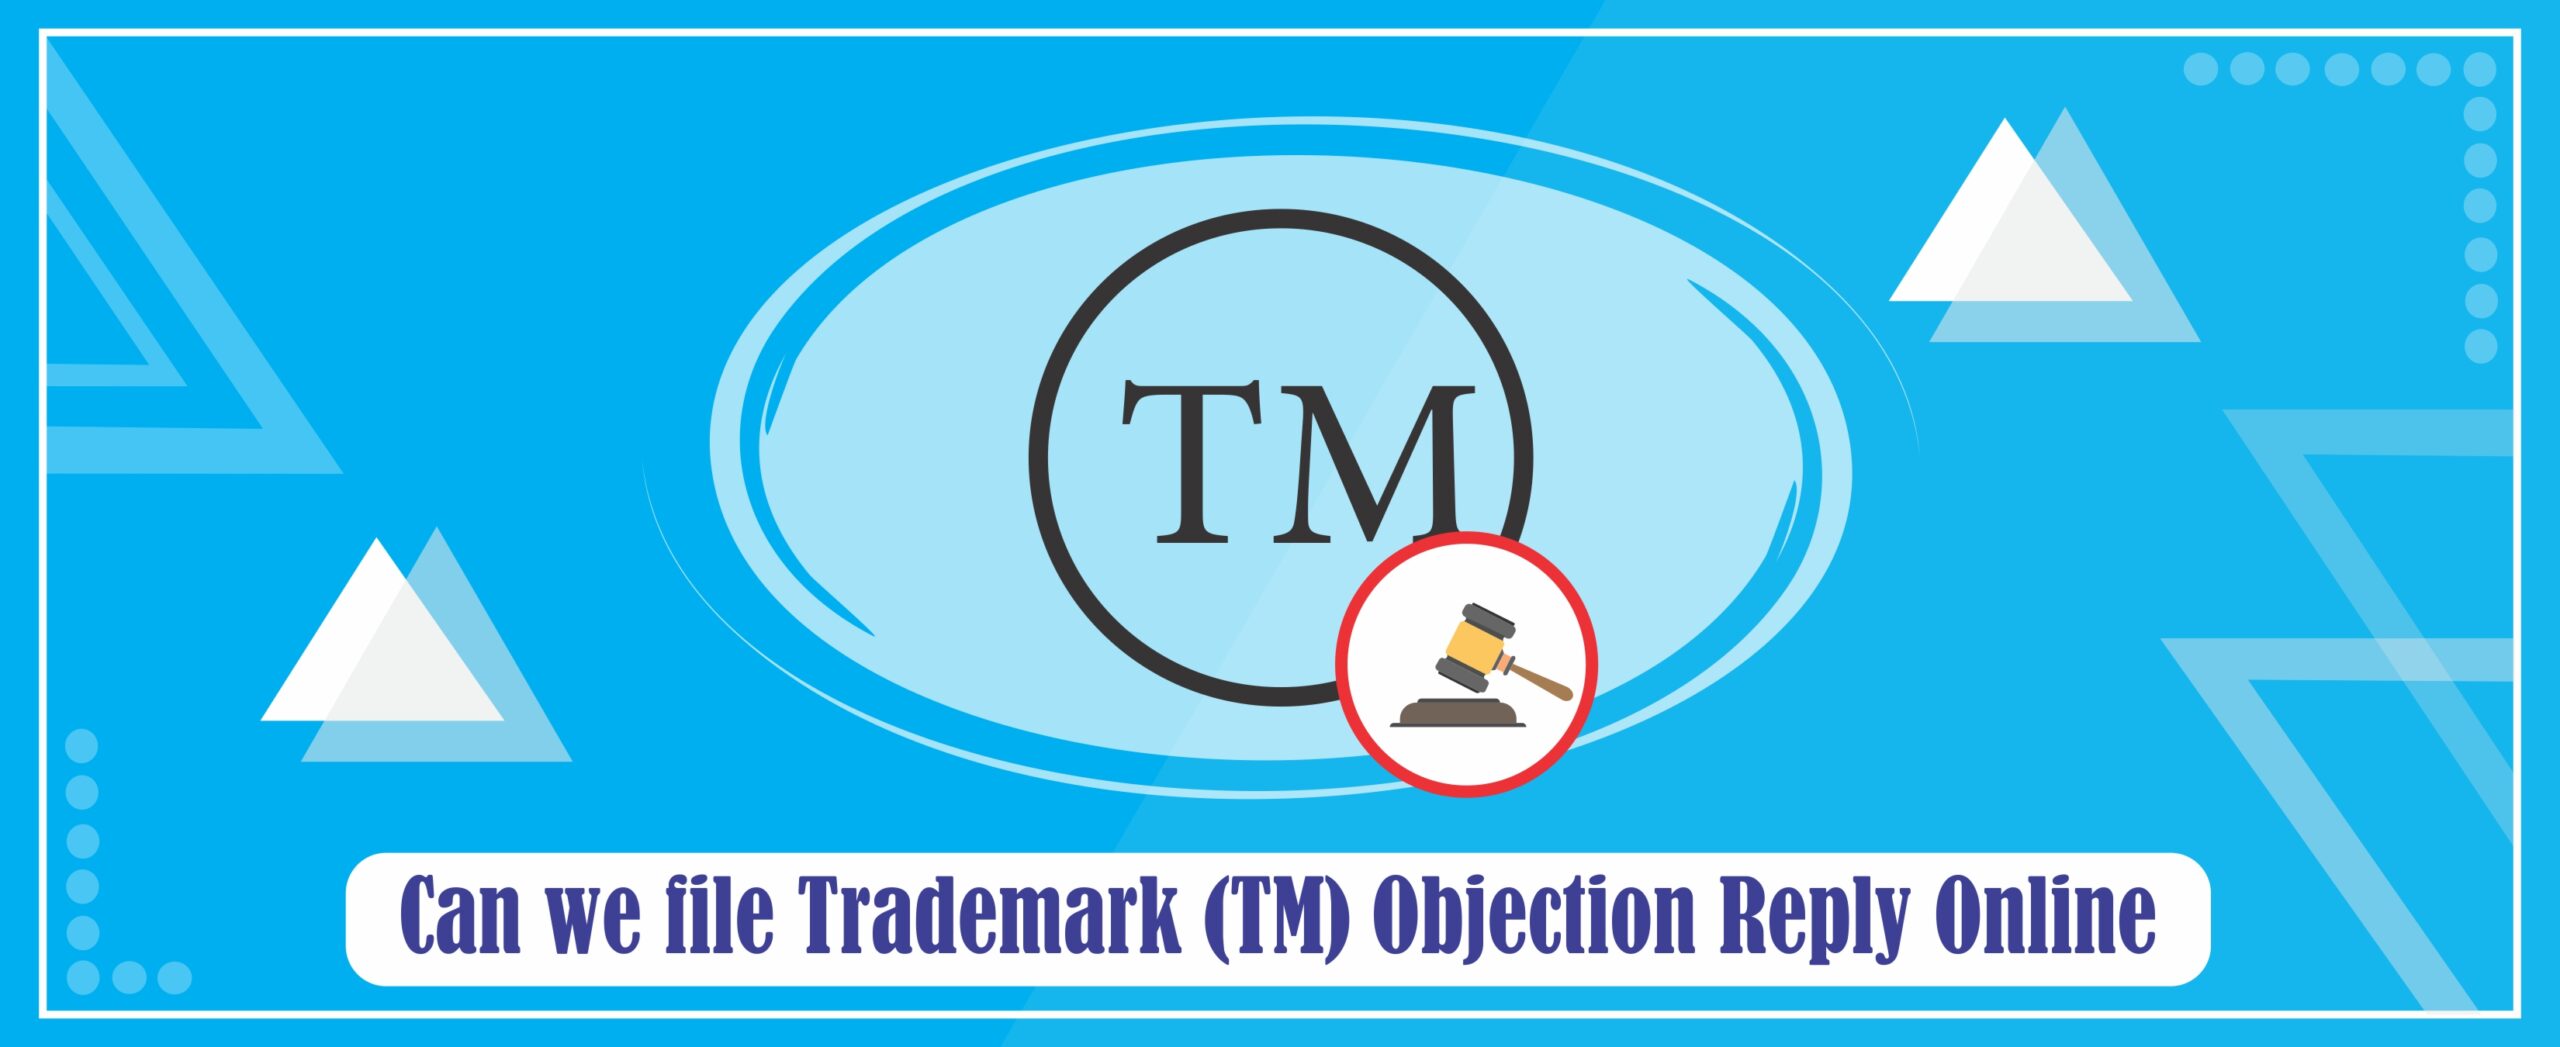 How can we file Trademark (TM) Objection Reply